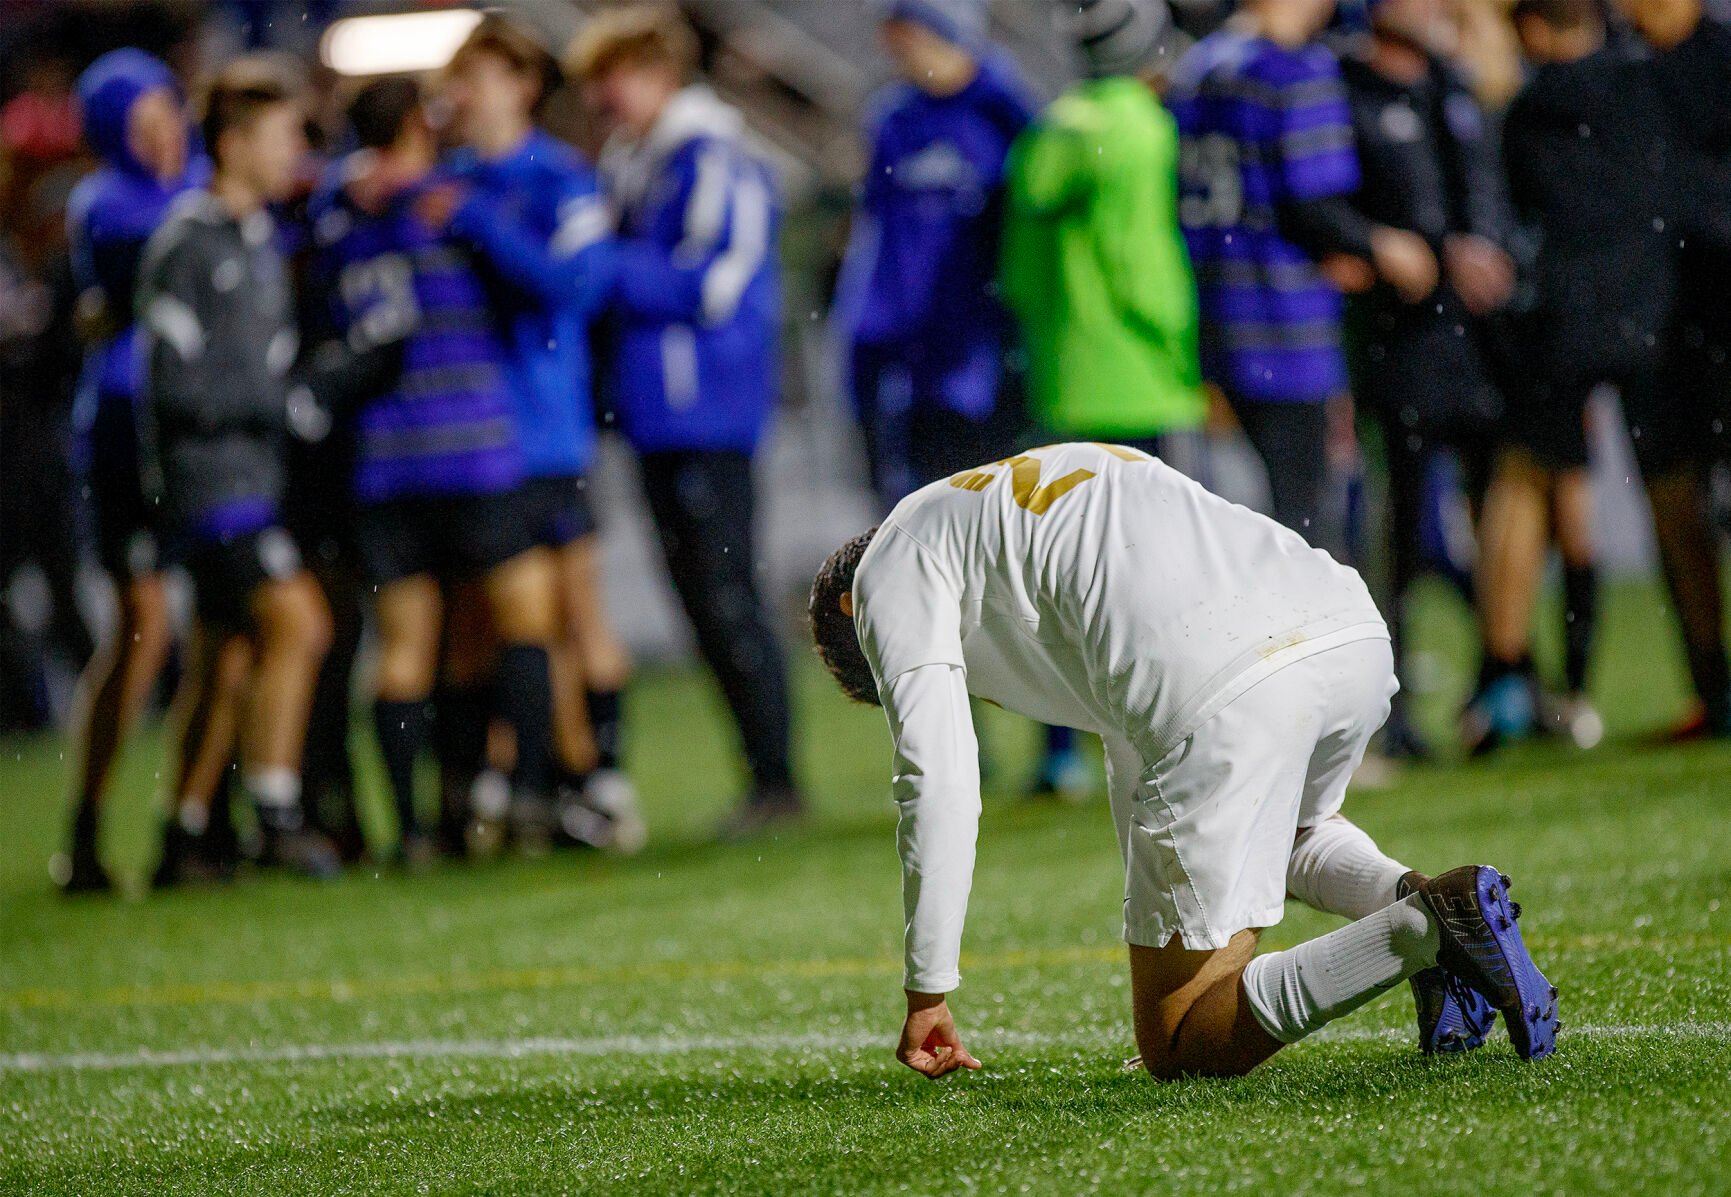 Boys soocer: Stonington falls to Lewis Mills in Class M state final